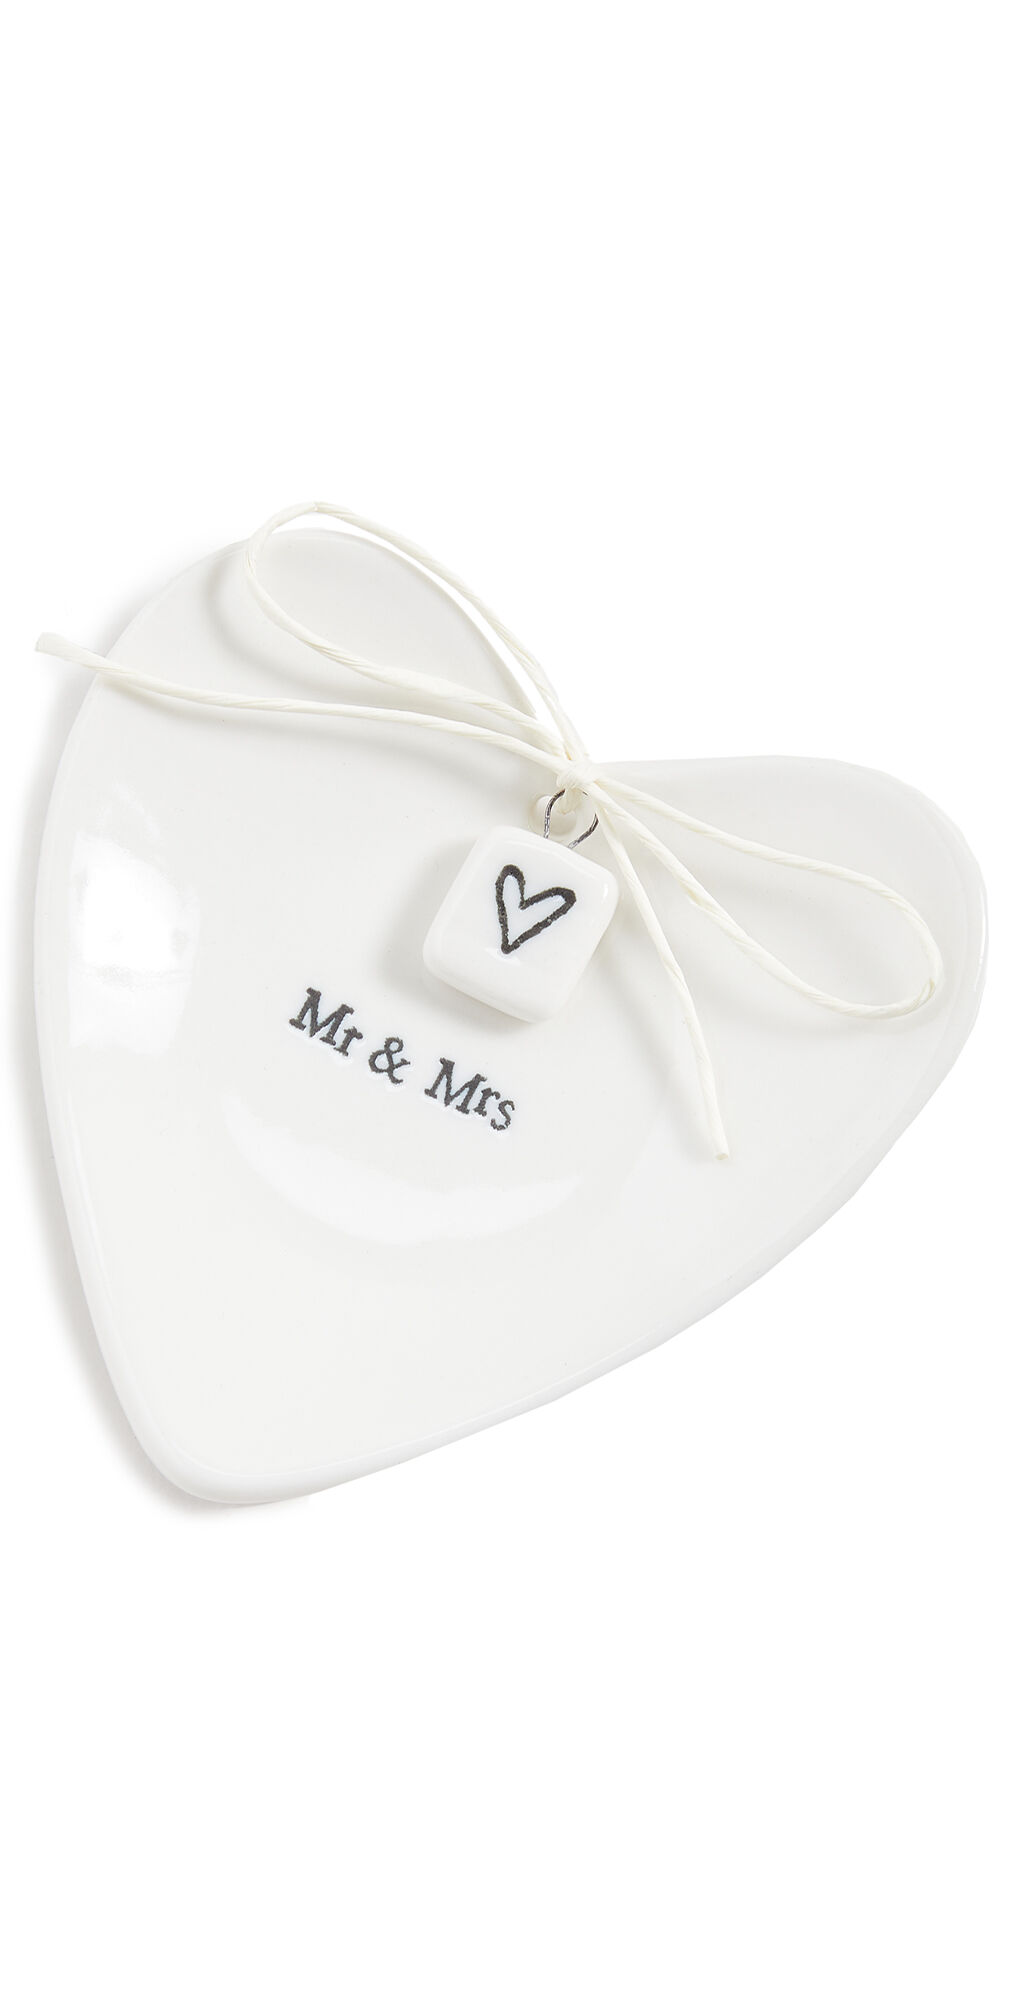 Shopbop Home Shopbop @Home Mr & Mrs Heart Shaped Ring Dish White One Size    size: